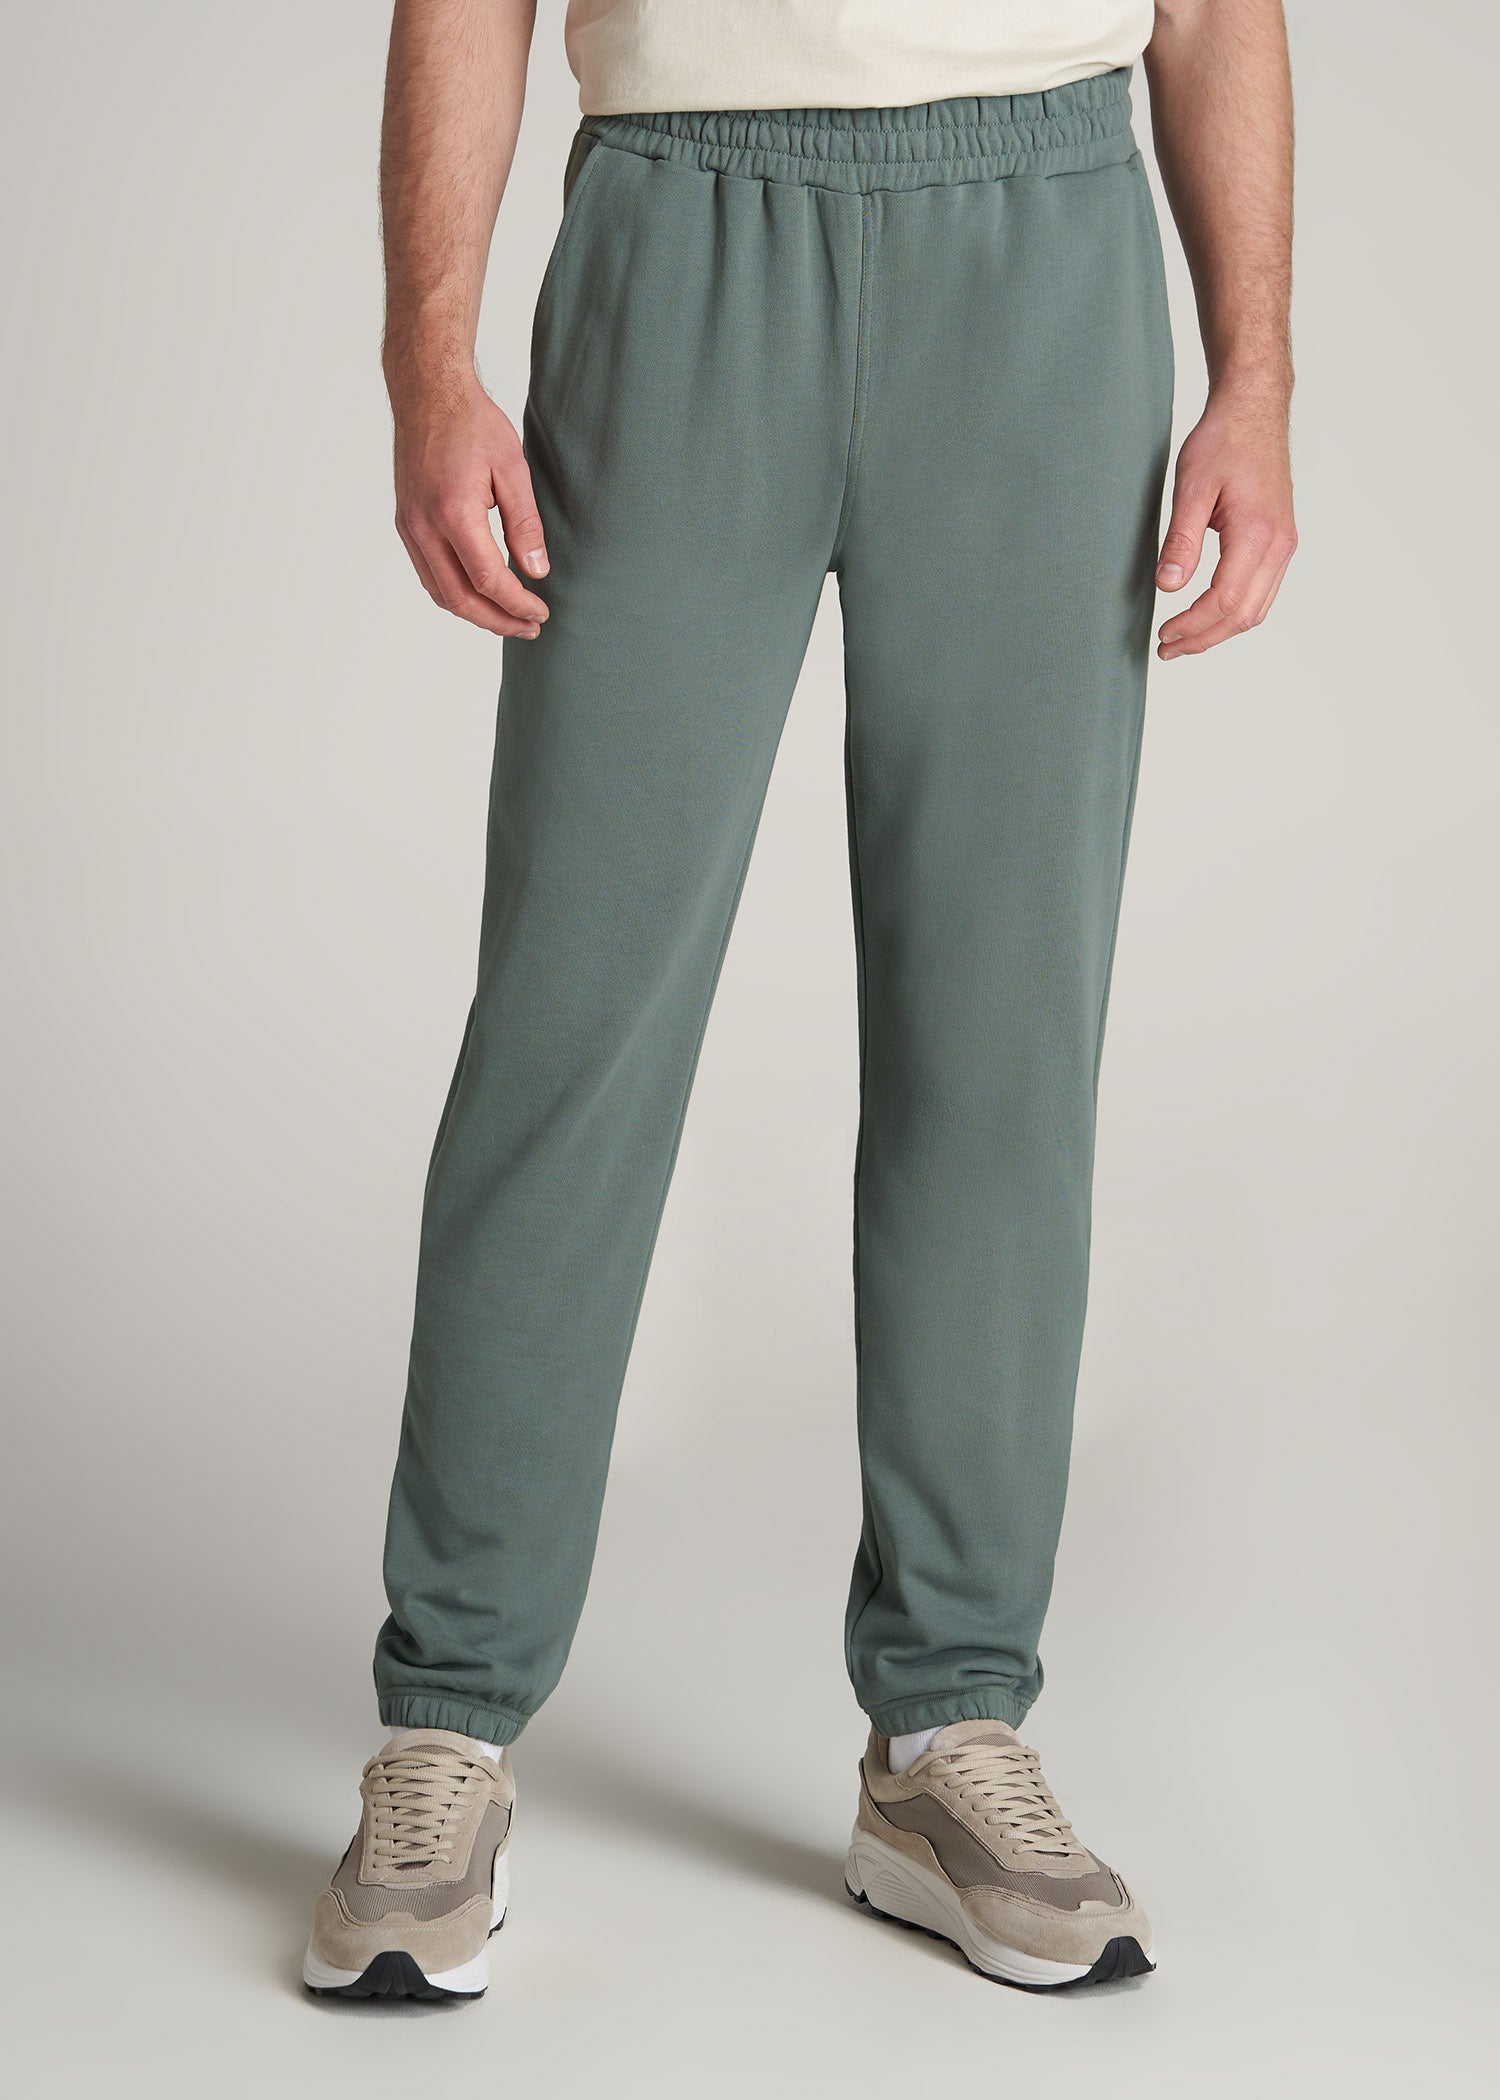    American-Tall-Men-80-20-French-Terry-Sweatpants-Malachite-Green-front